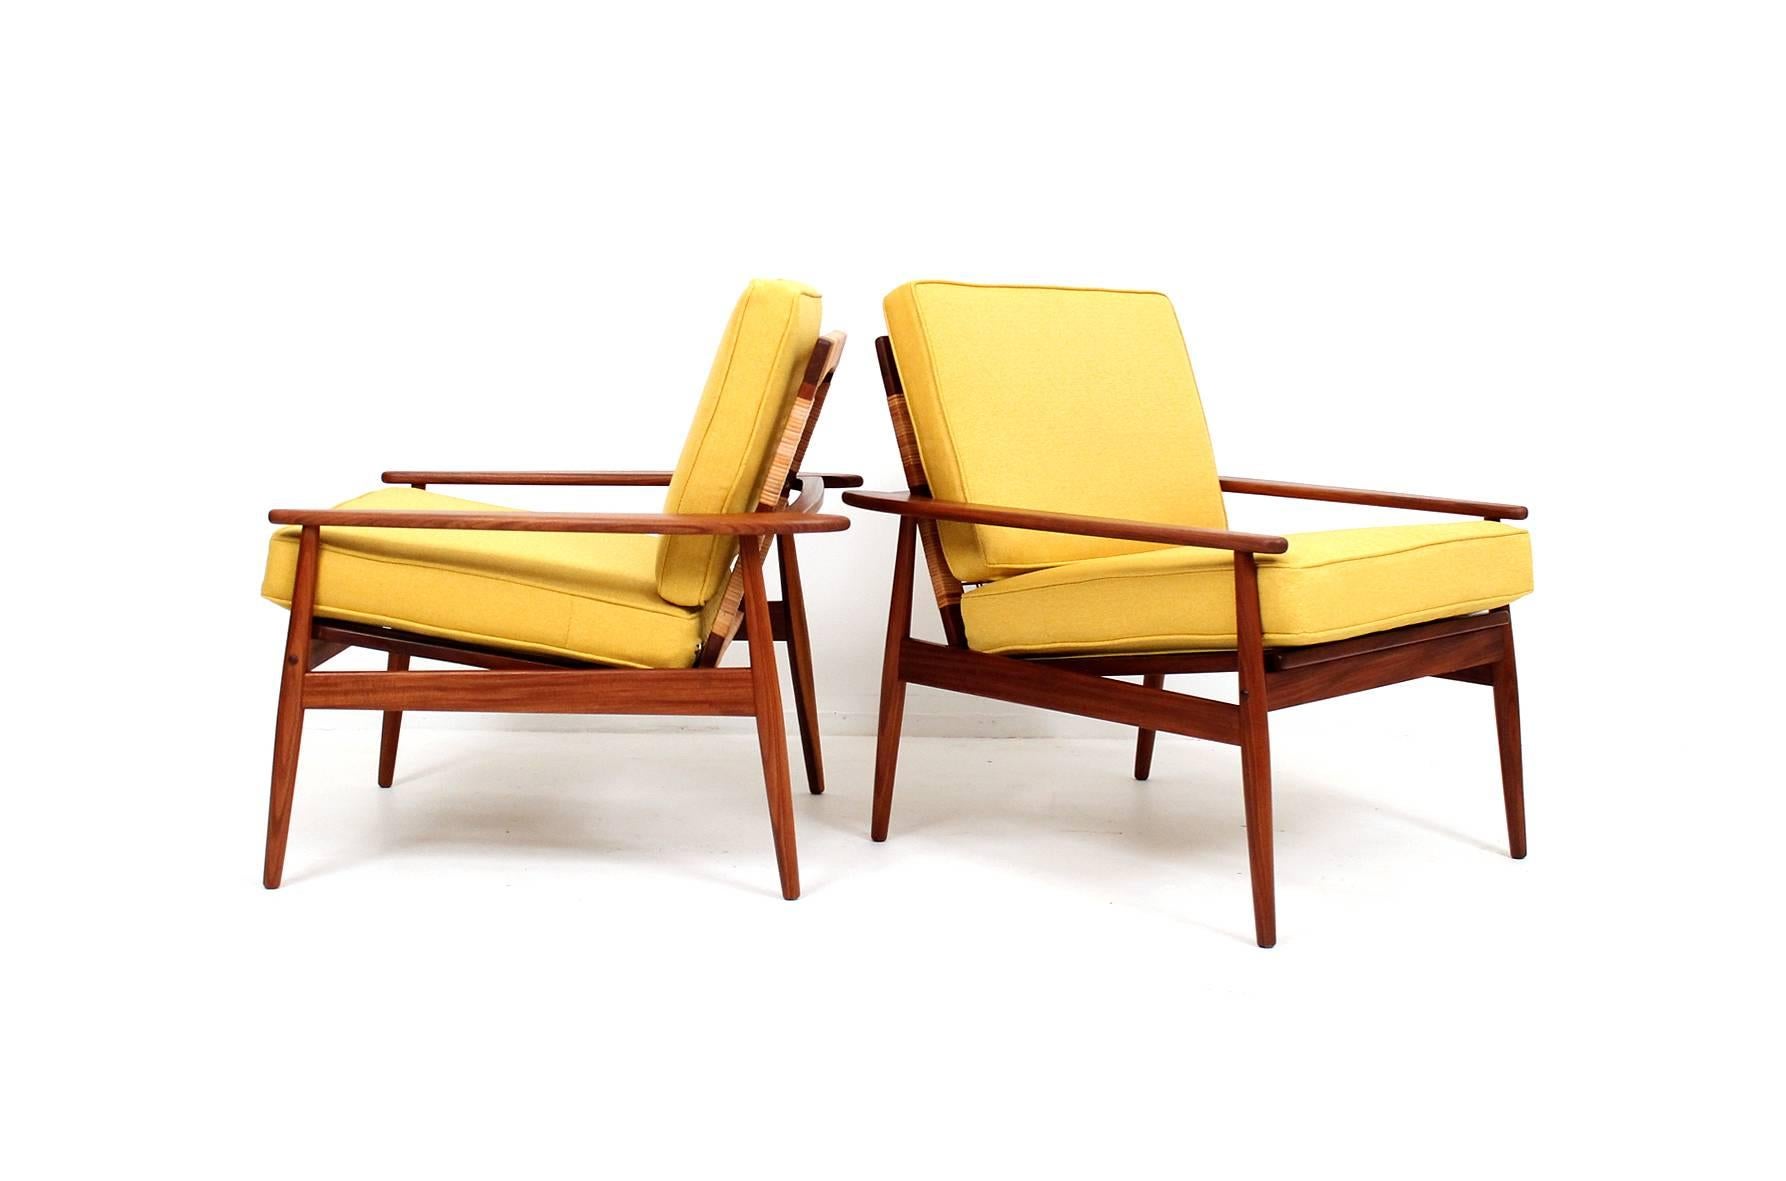 Pair of teak and cane lounge chairs designed by Hans Olsen for the Danish firm Juul Kristensen. Well designed and comfortable pair of Danish lounge chairs.  Signed to underside with the Juul Kristensen mark.